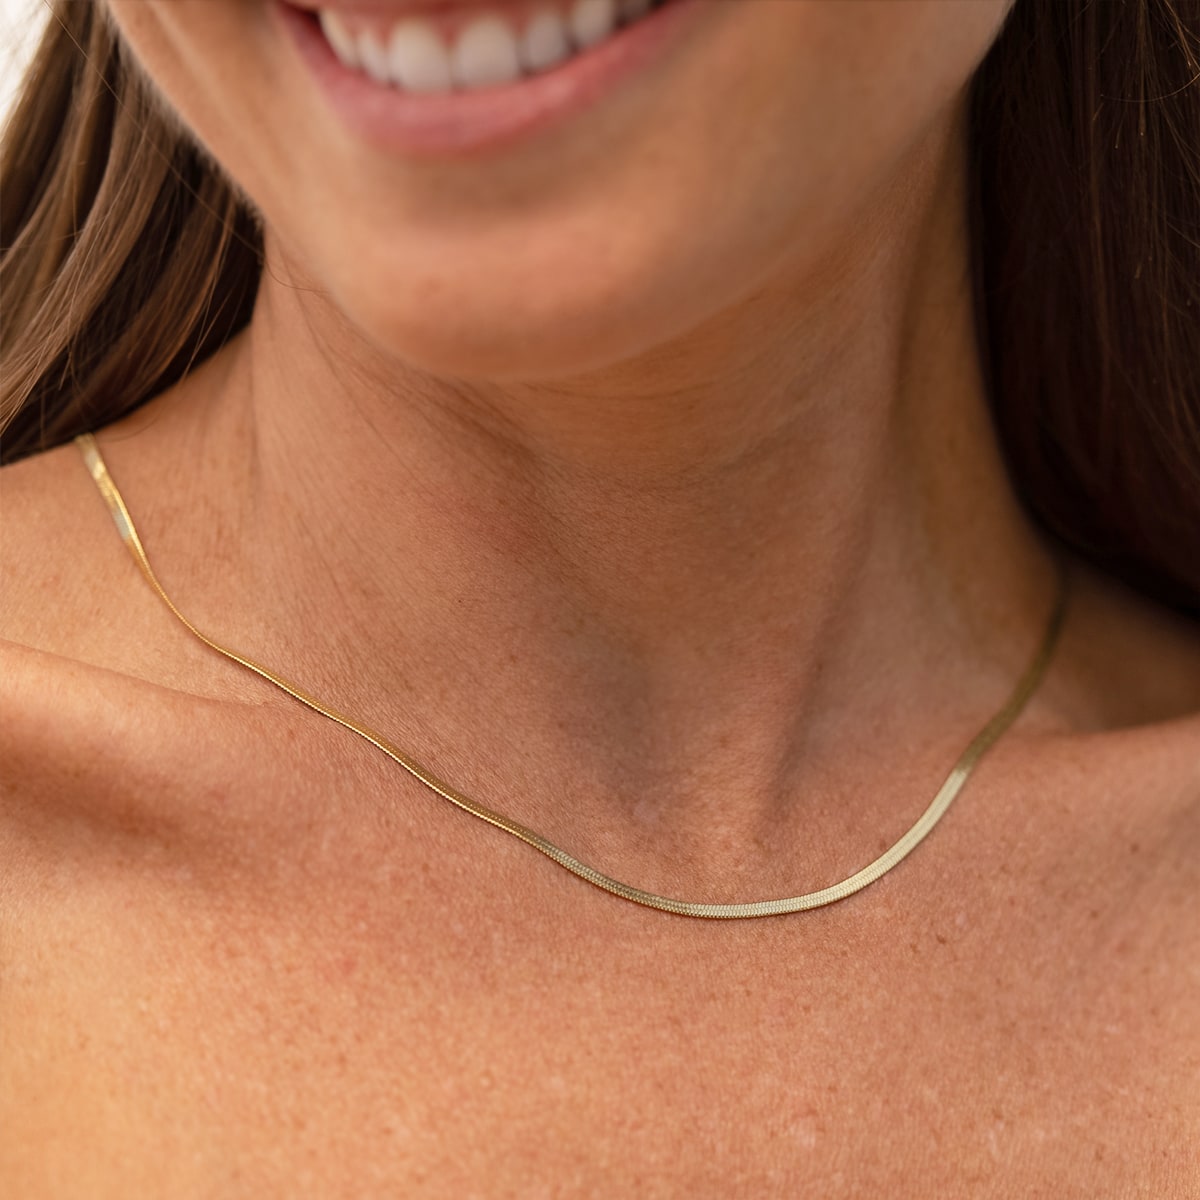 Simple gold chain necklace